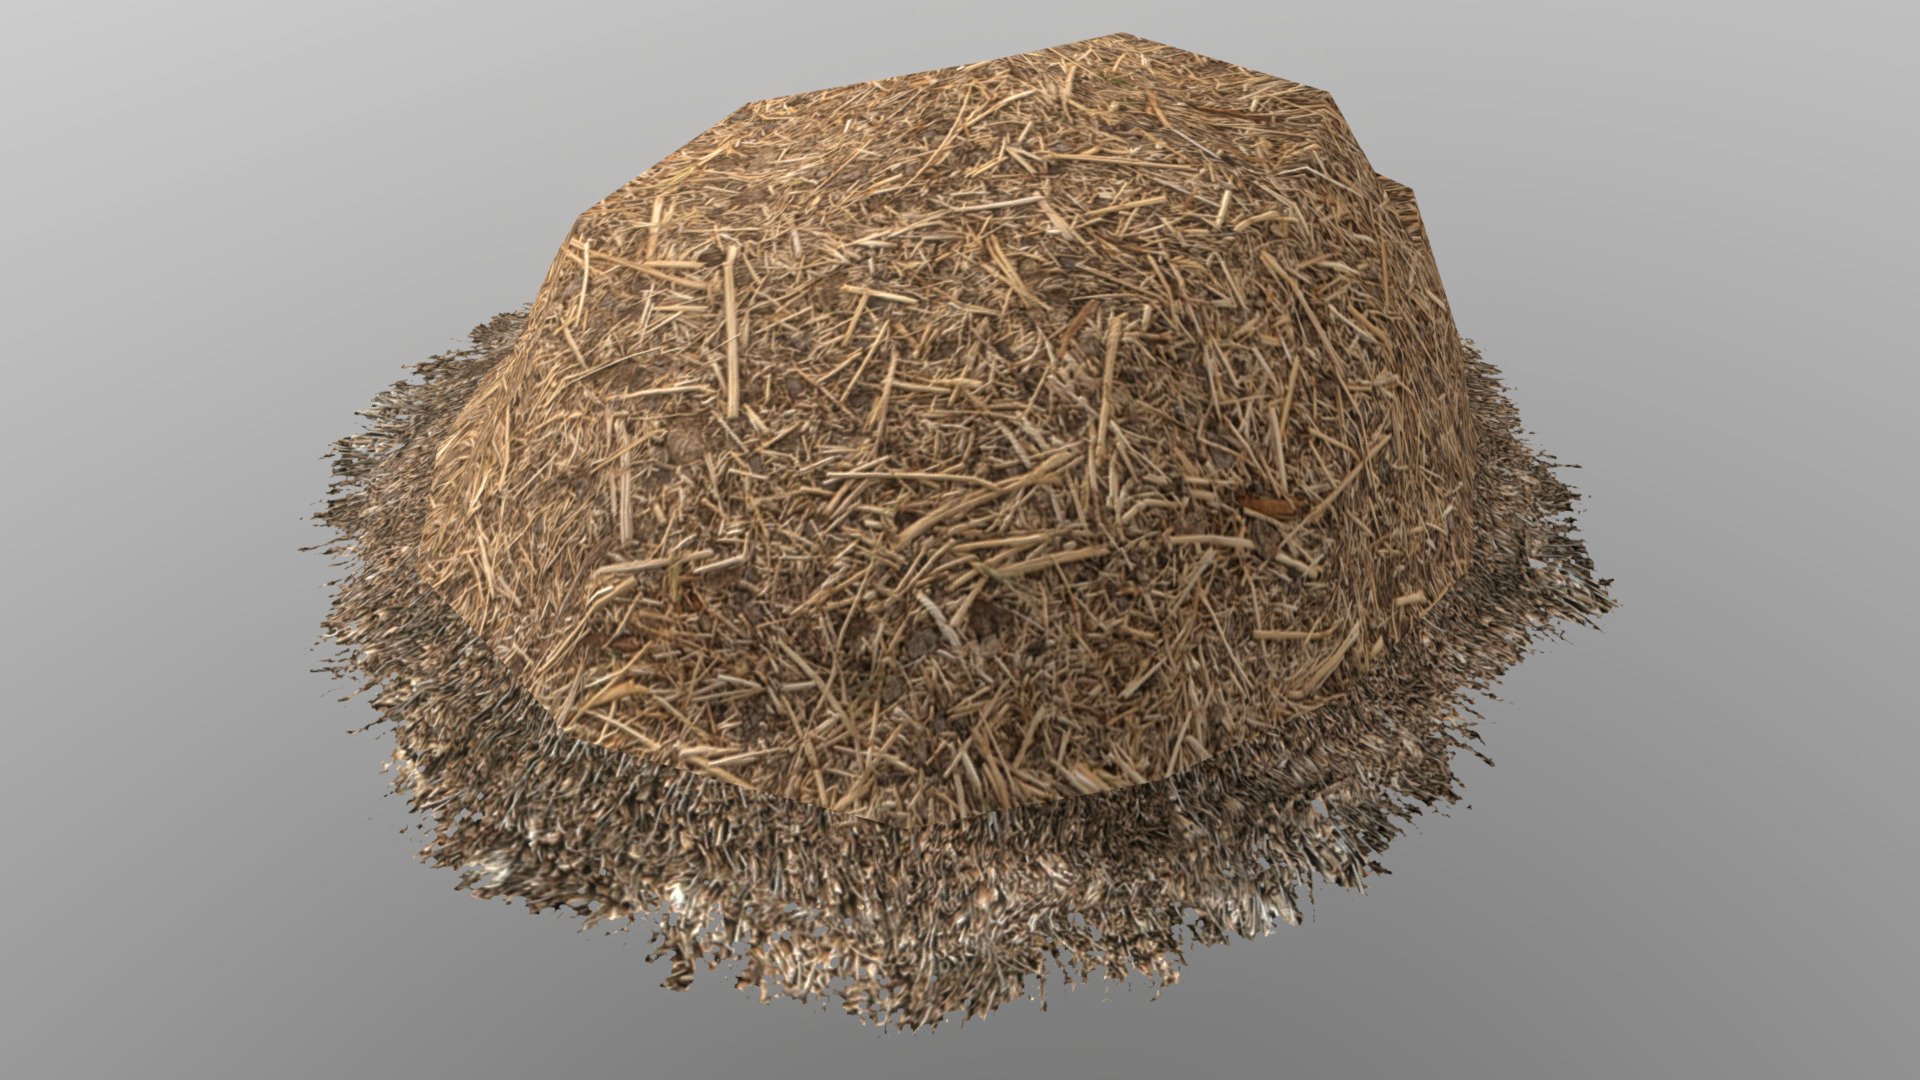 Haystack (Viking)
Bring your 3D model of a haystack to life with this  low-poly design. Perfect for use in games, animations, VR, AR, and more, this model is optimized for performance and still retains a high level of detail.


Features



low poly design with 153 vertices

280 edges

128 faces (polygons)

256 tris

2k PBR Textures and materials

File formats included: .obj, .fbx, .dae


Tools Used
This Haystack 3D model was created using Blender 3.3.1, a popular and versatile 3D creation software.


Availability
This low-poly Haystack 3D model is ready for use and available for purchase. Bring your project to the next level with this high-quality and optimized model 3d model